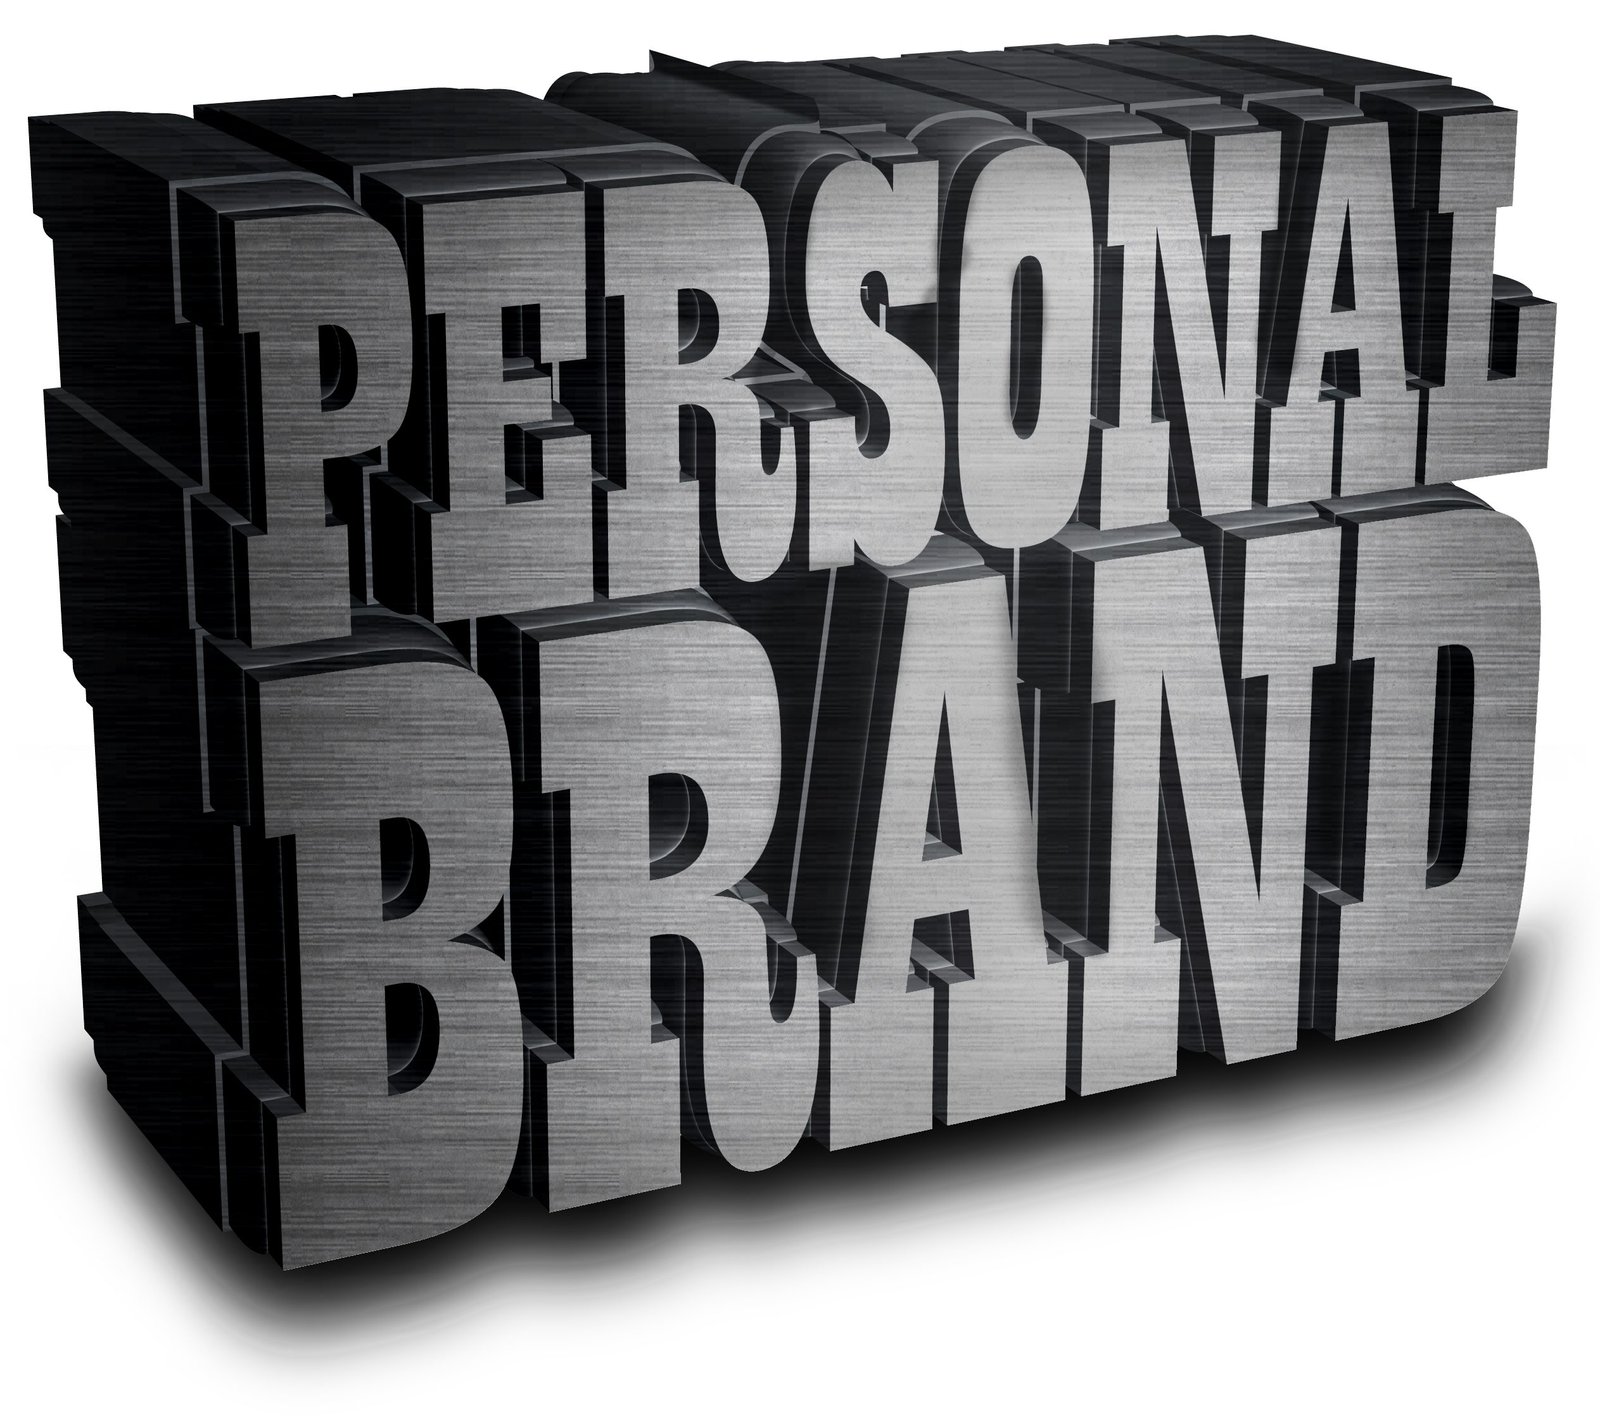 Brand Identity – What Your Social Media Presence Says About You